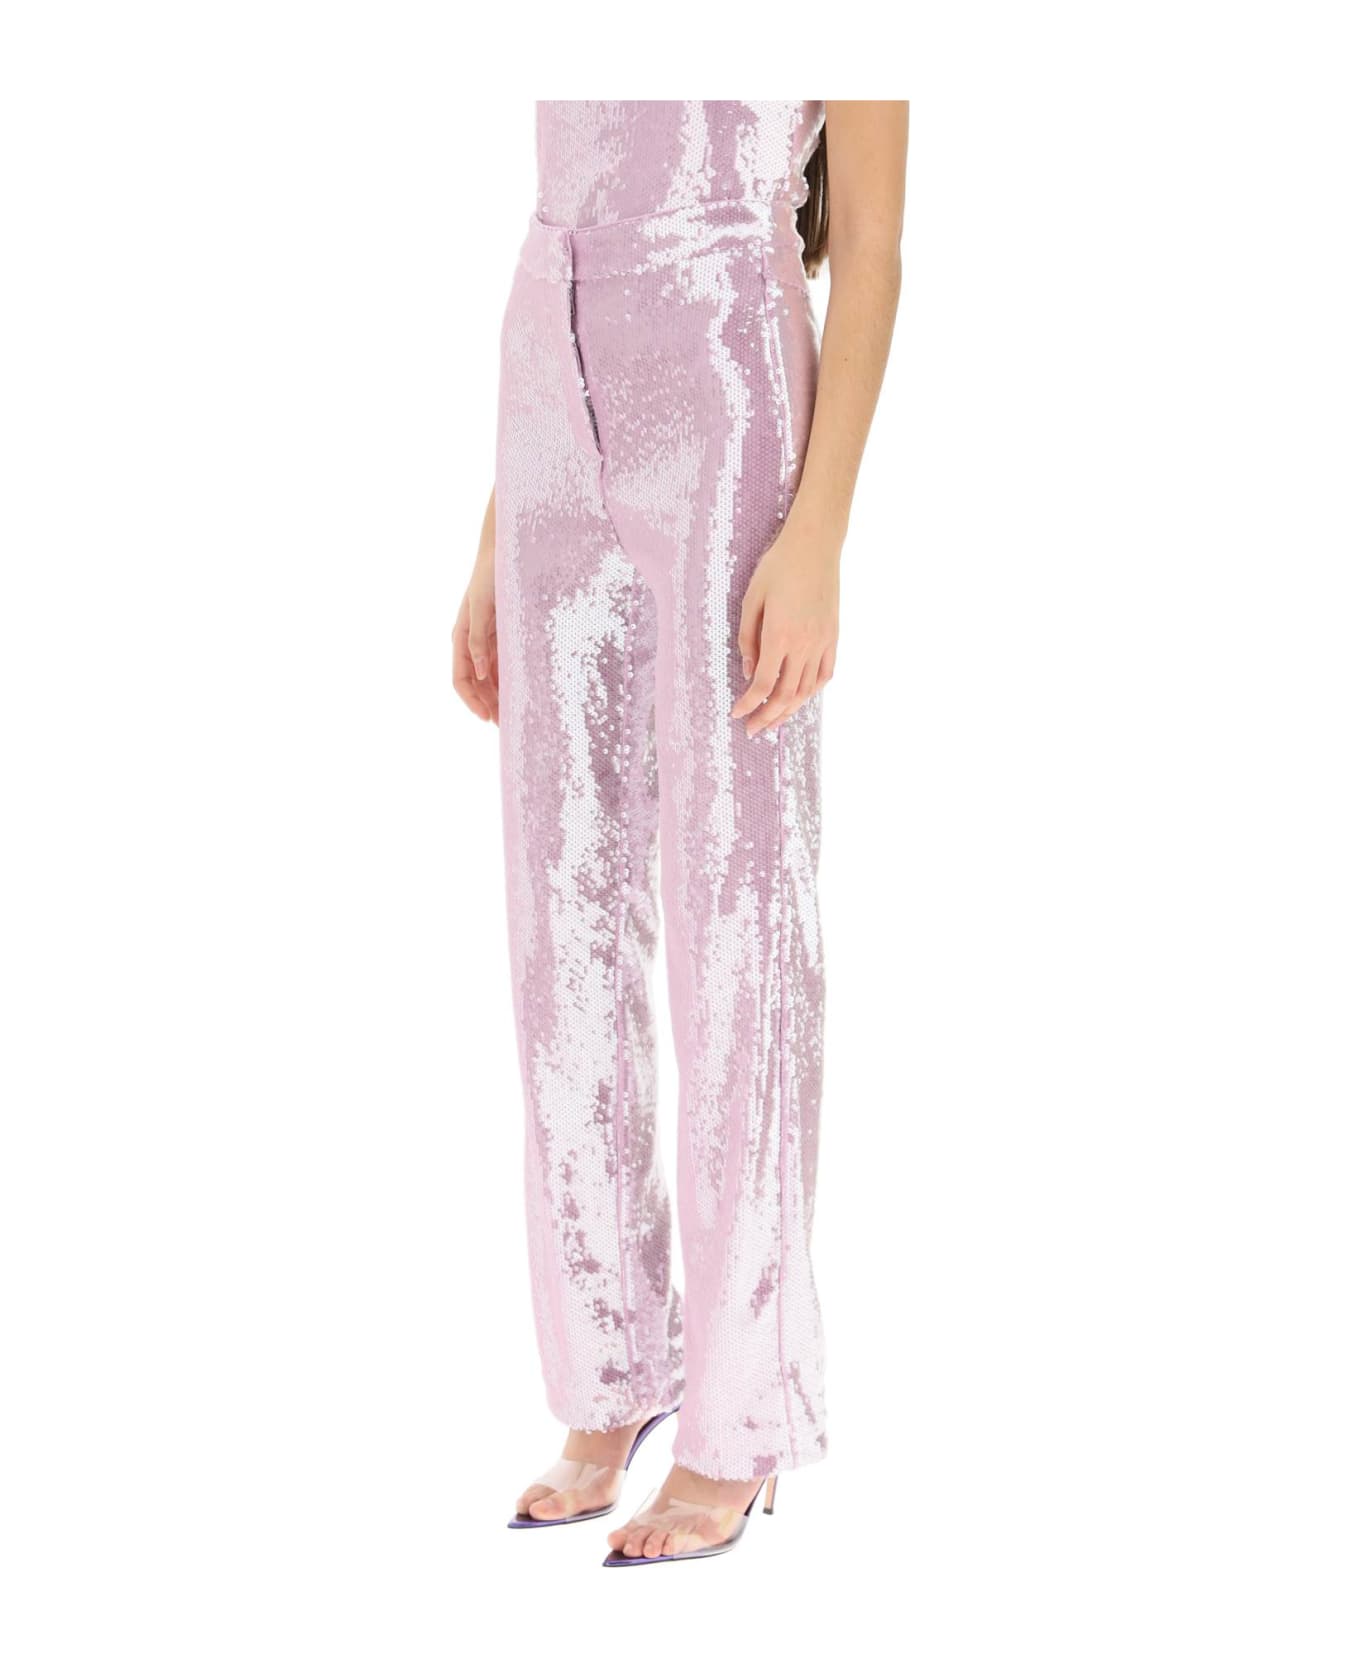 Rotate by Birger Christensen 'robyana' Sequined Pants - LUPINE (Purple)